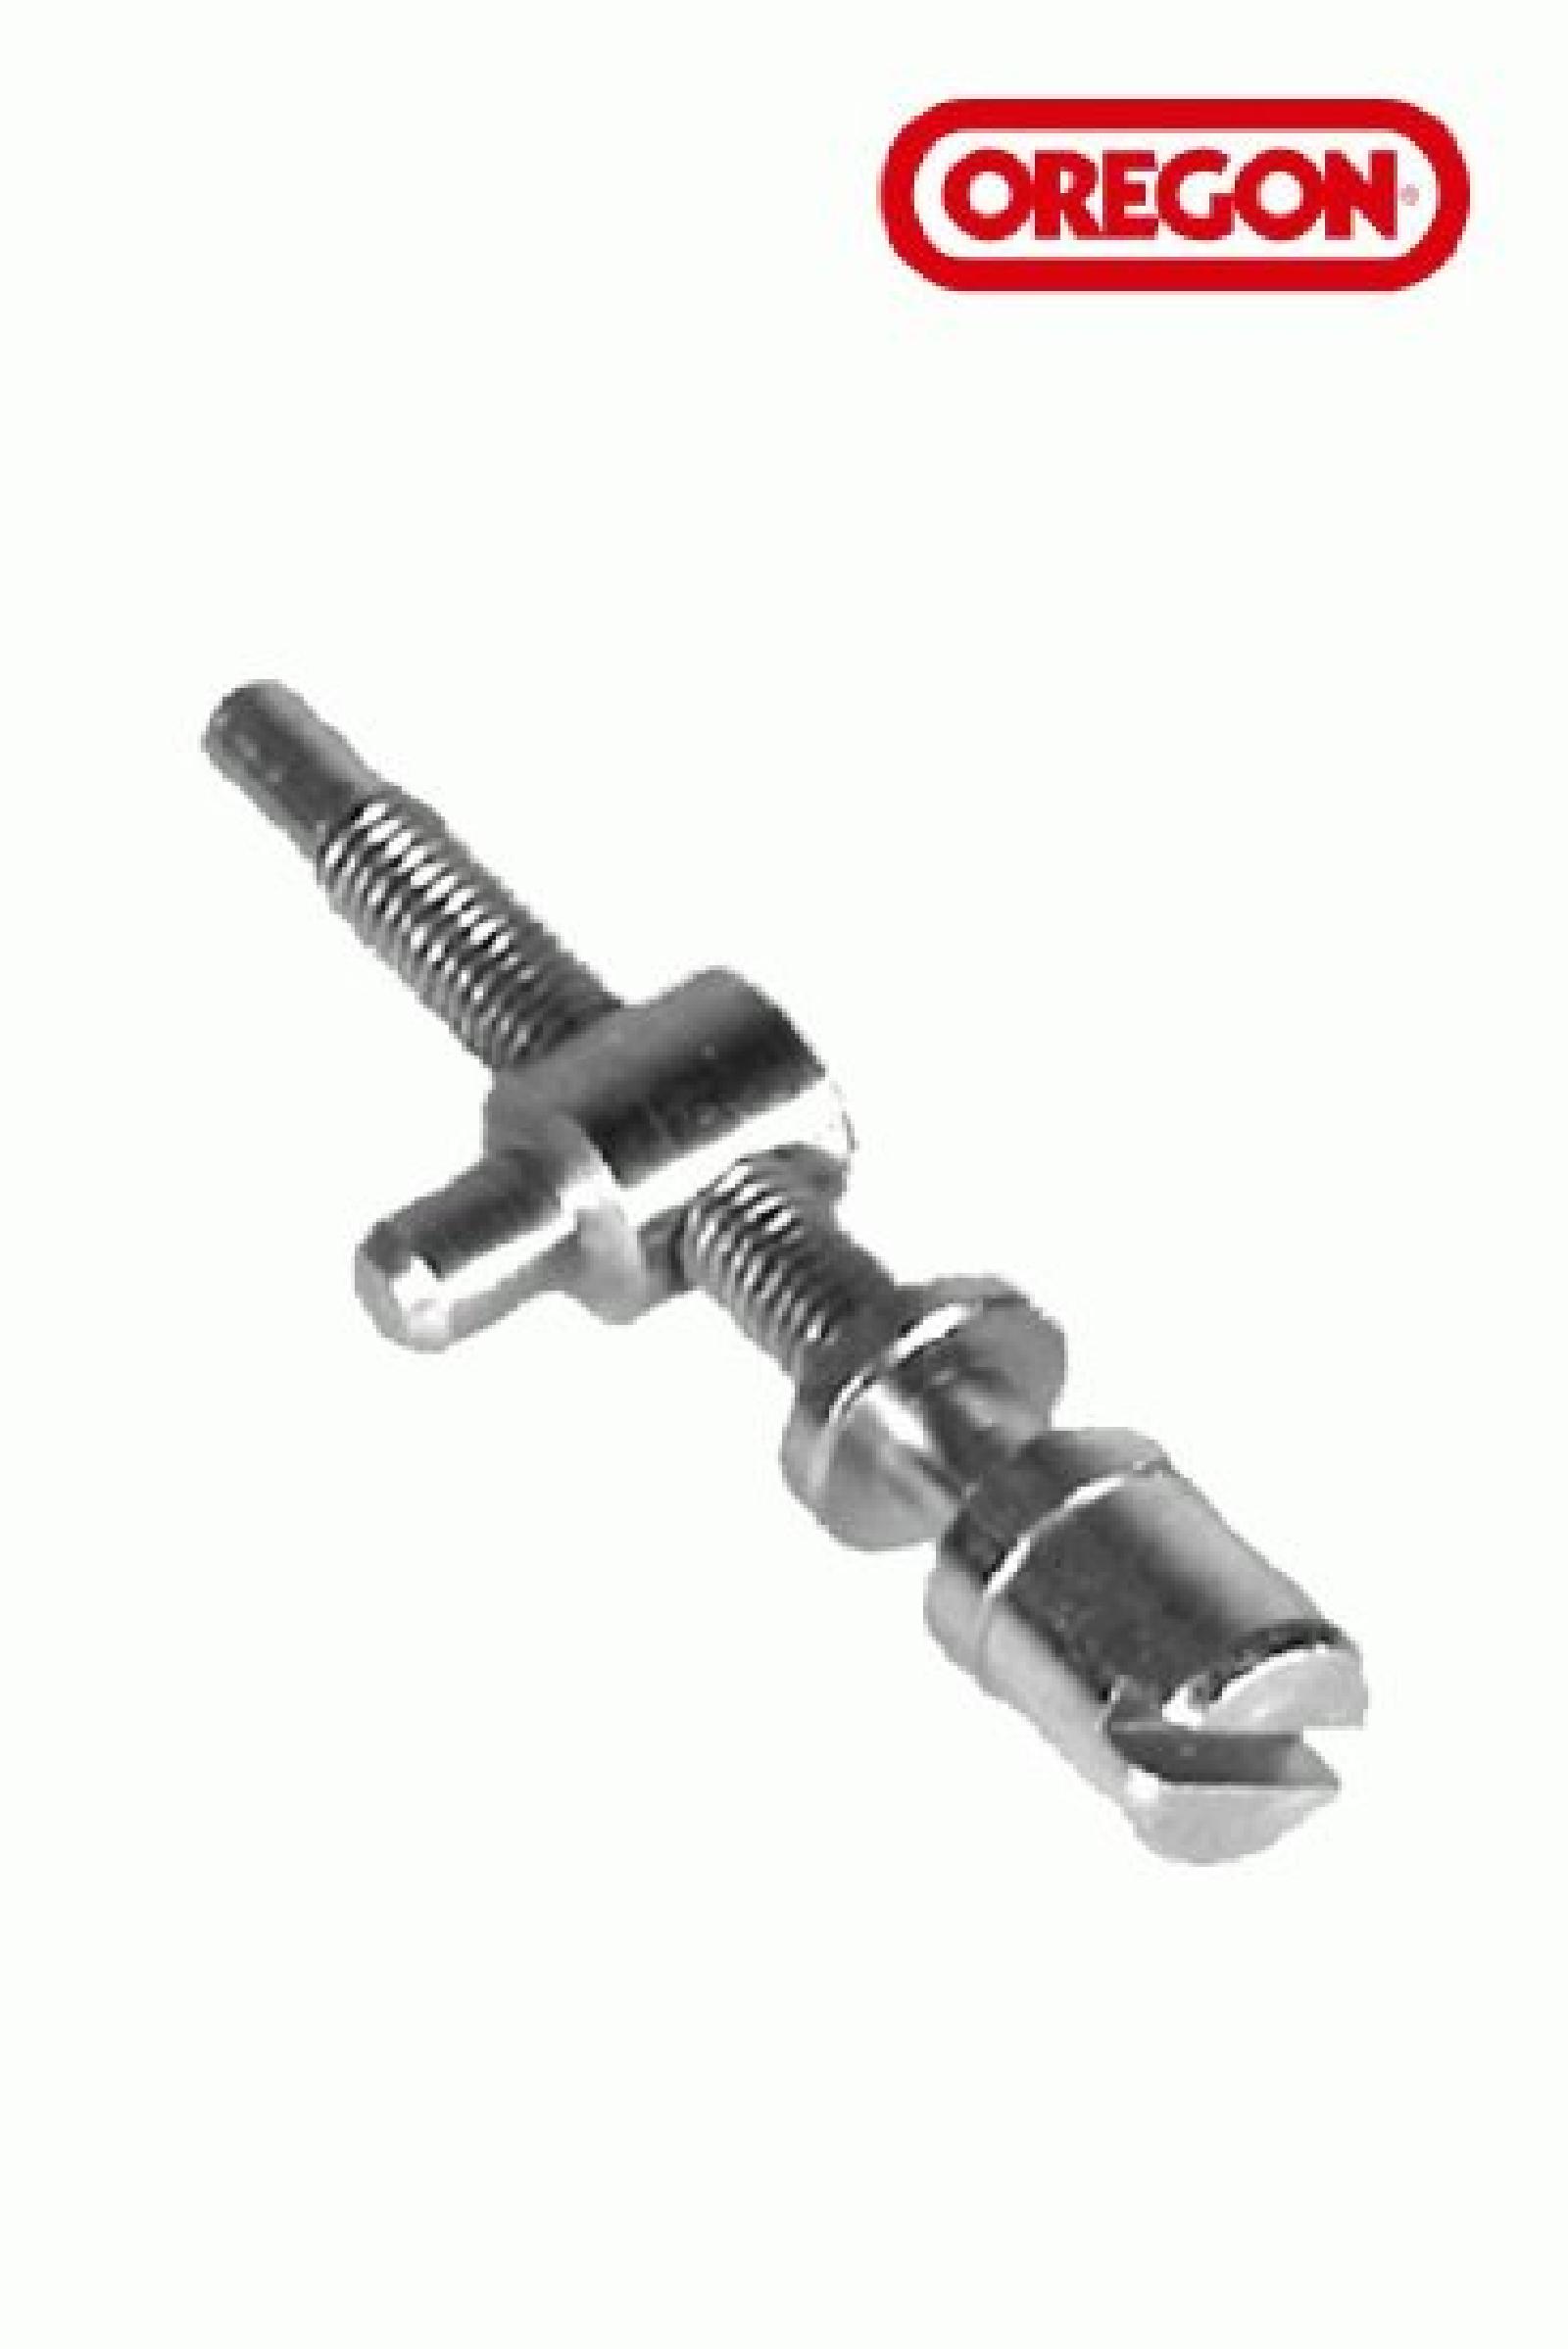 CHAIN ADJUSTER STIHL part# 56-008 by Oregon - Click Image to Close